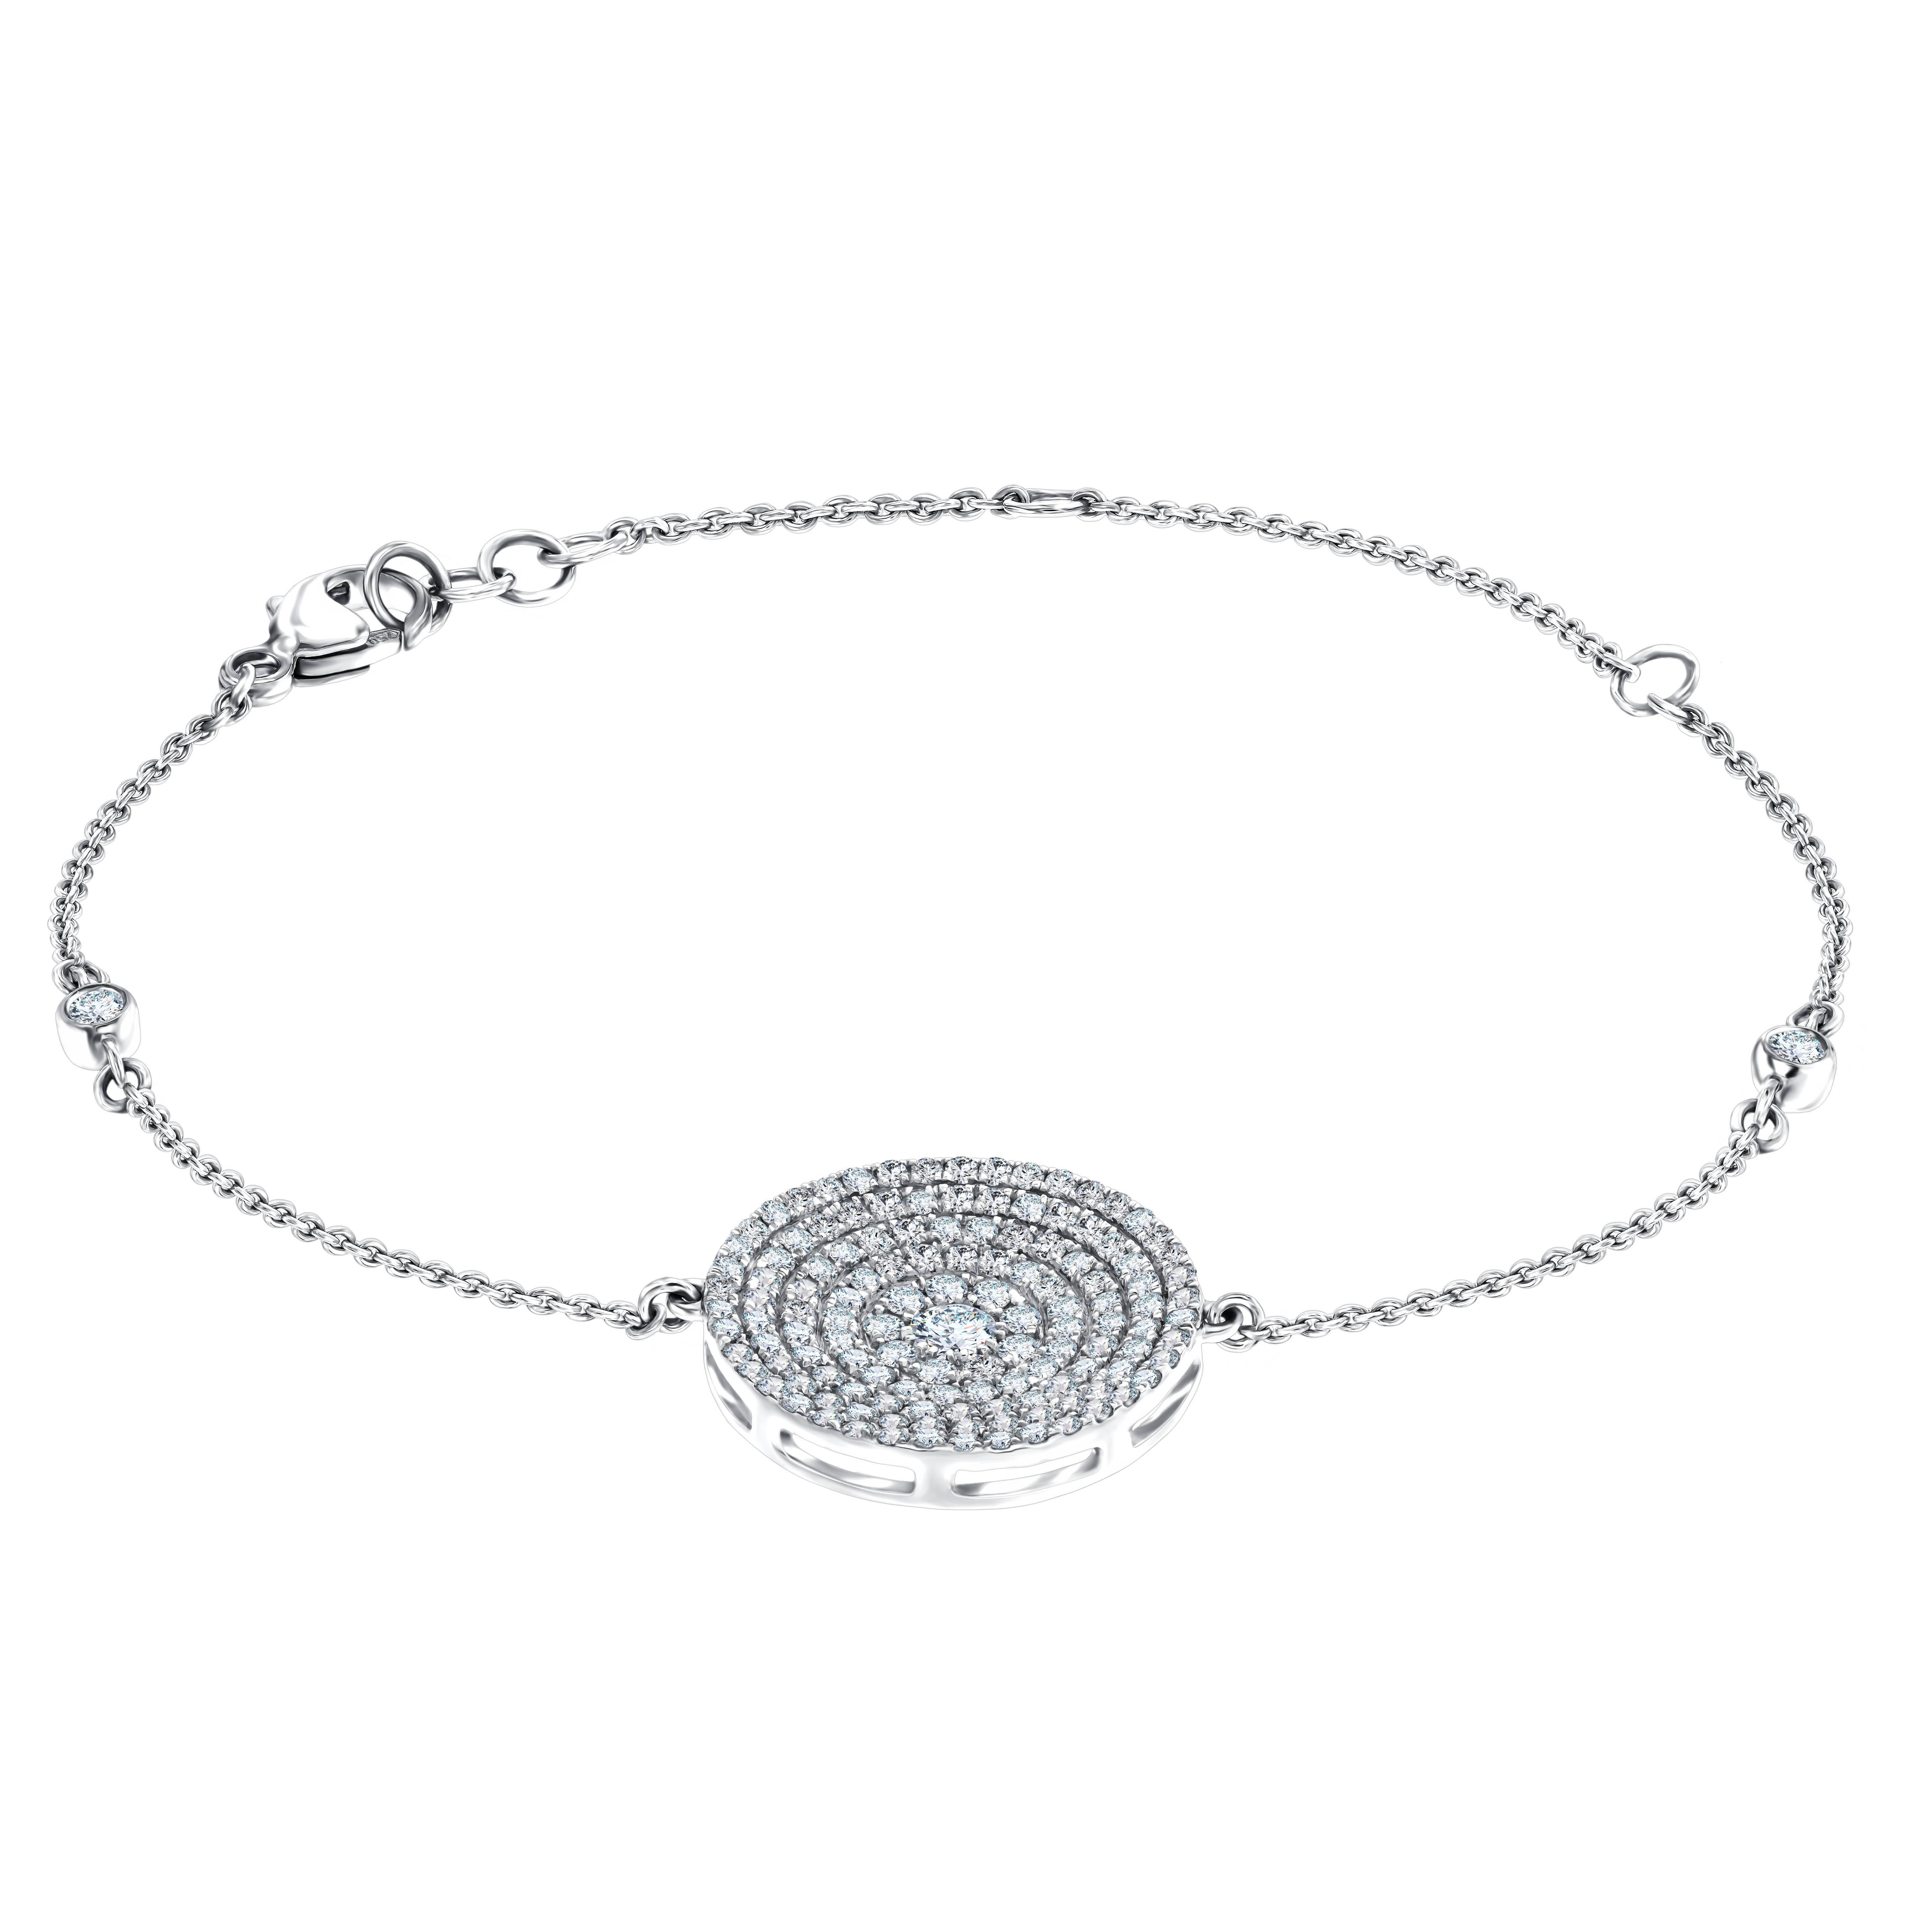 Concave disc of 0.85 carat H-SI micro set diamonds in a concentric circles is the focal point of this otherwise delicate bracelet with an adorable diamond accented chain. Set in 18 karat white gold and featuring an adjustable chain. The weight of